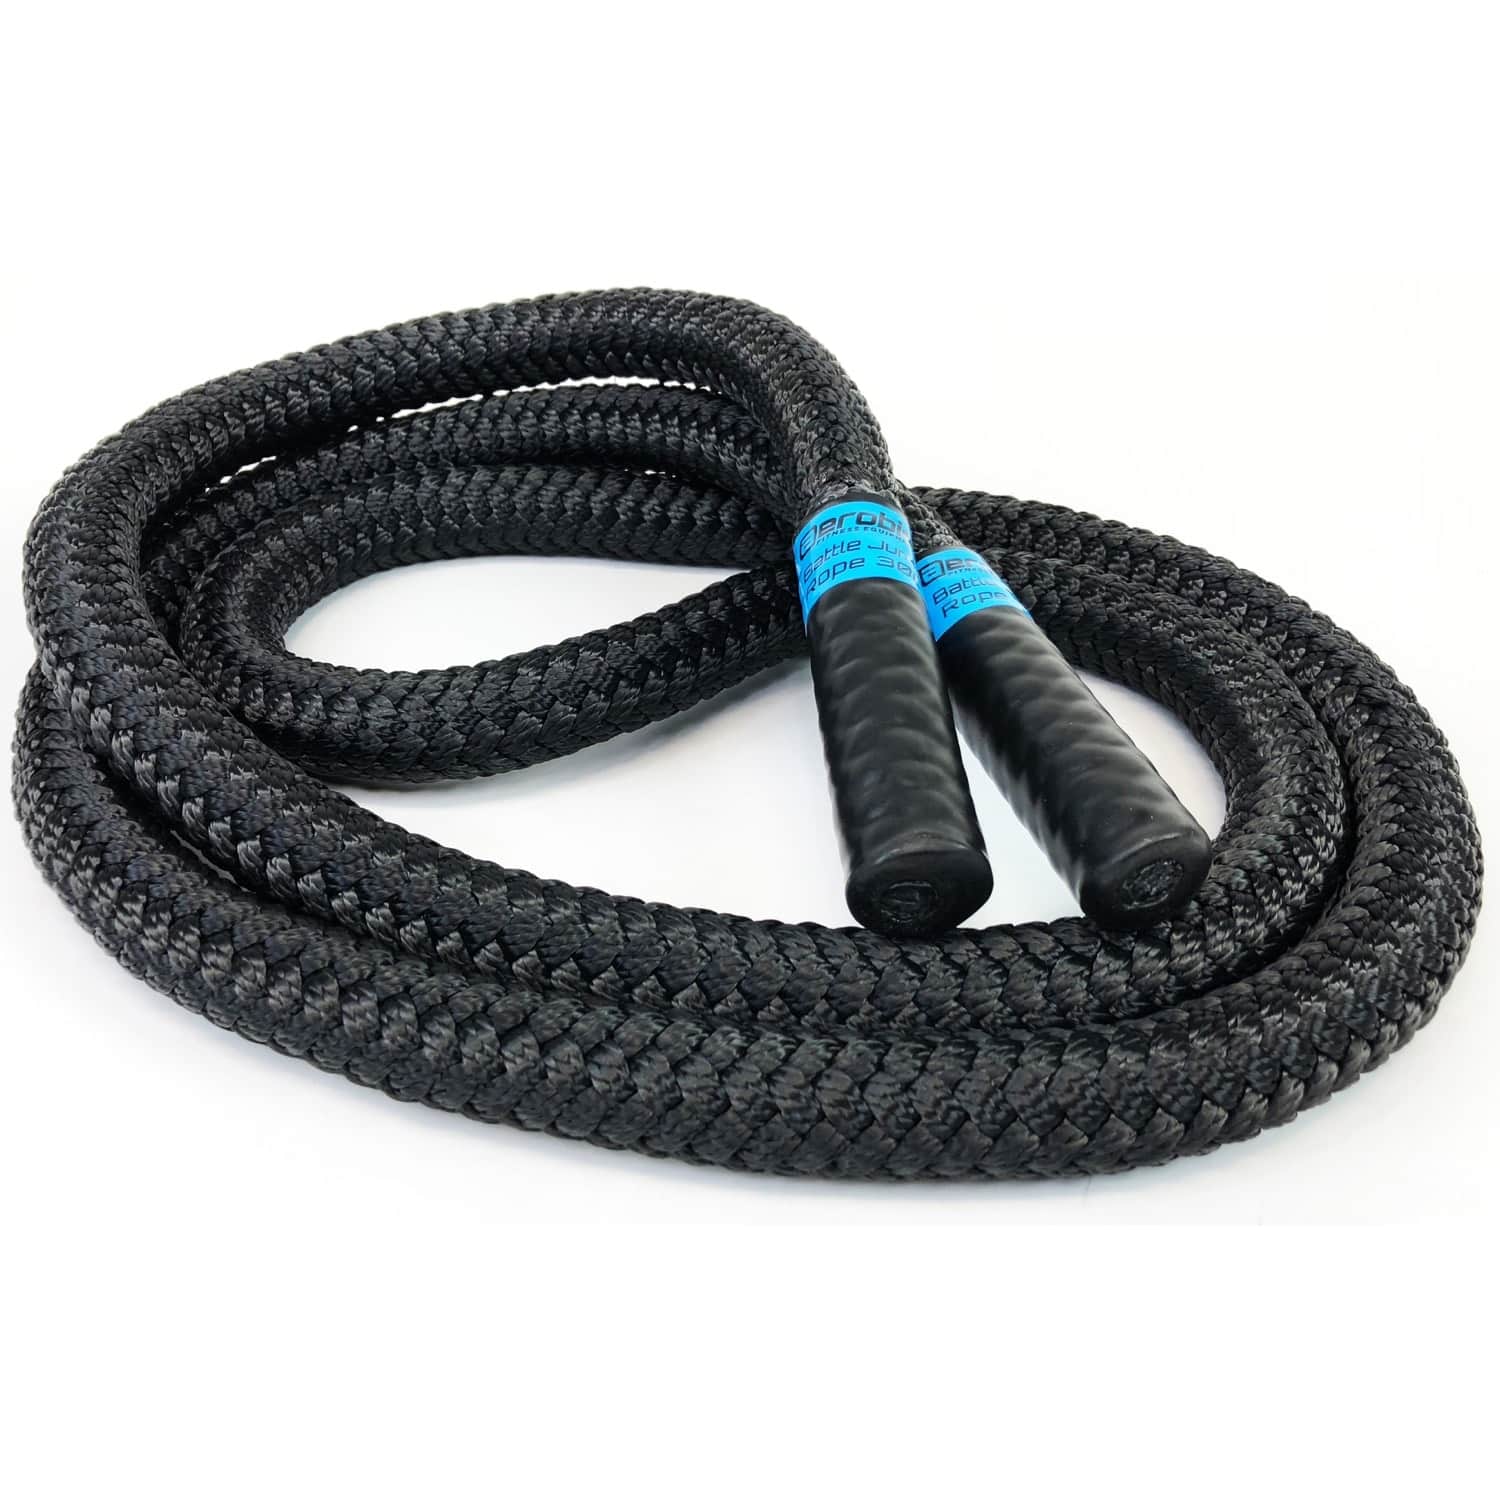 Battle Jump Rope - Heavy skipping rope